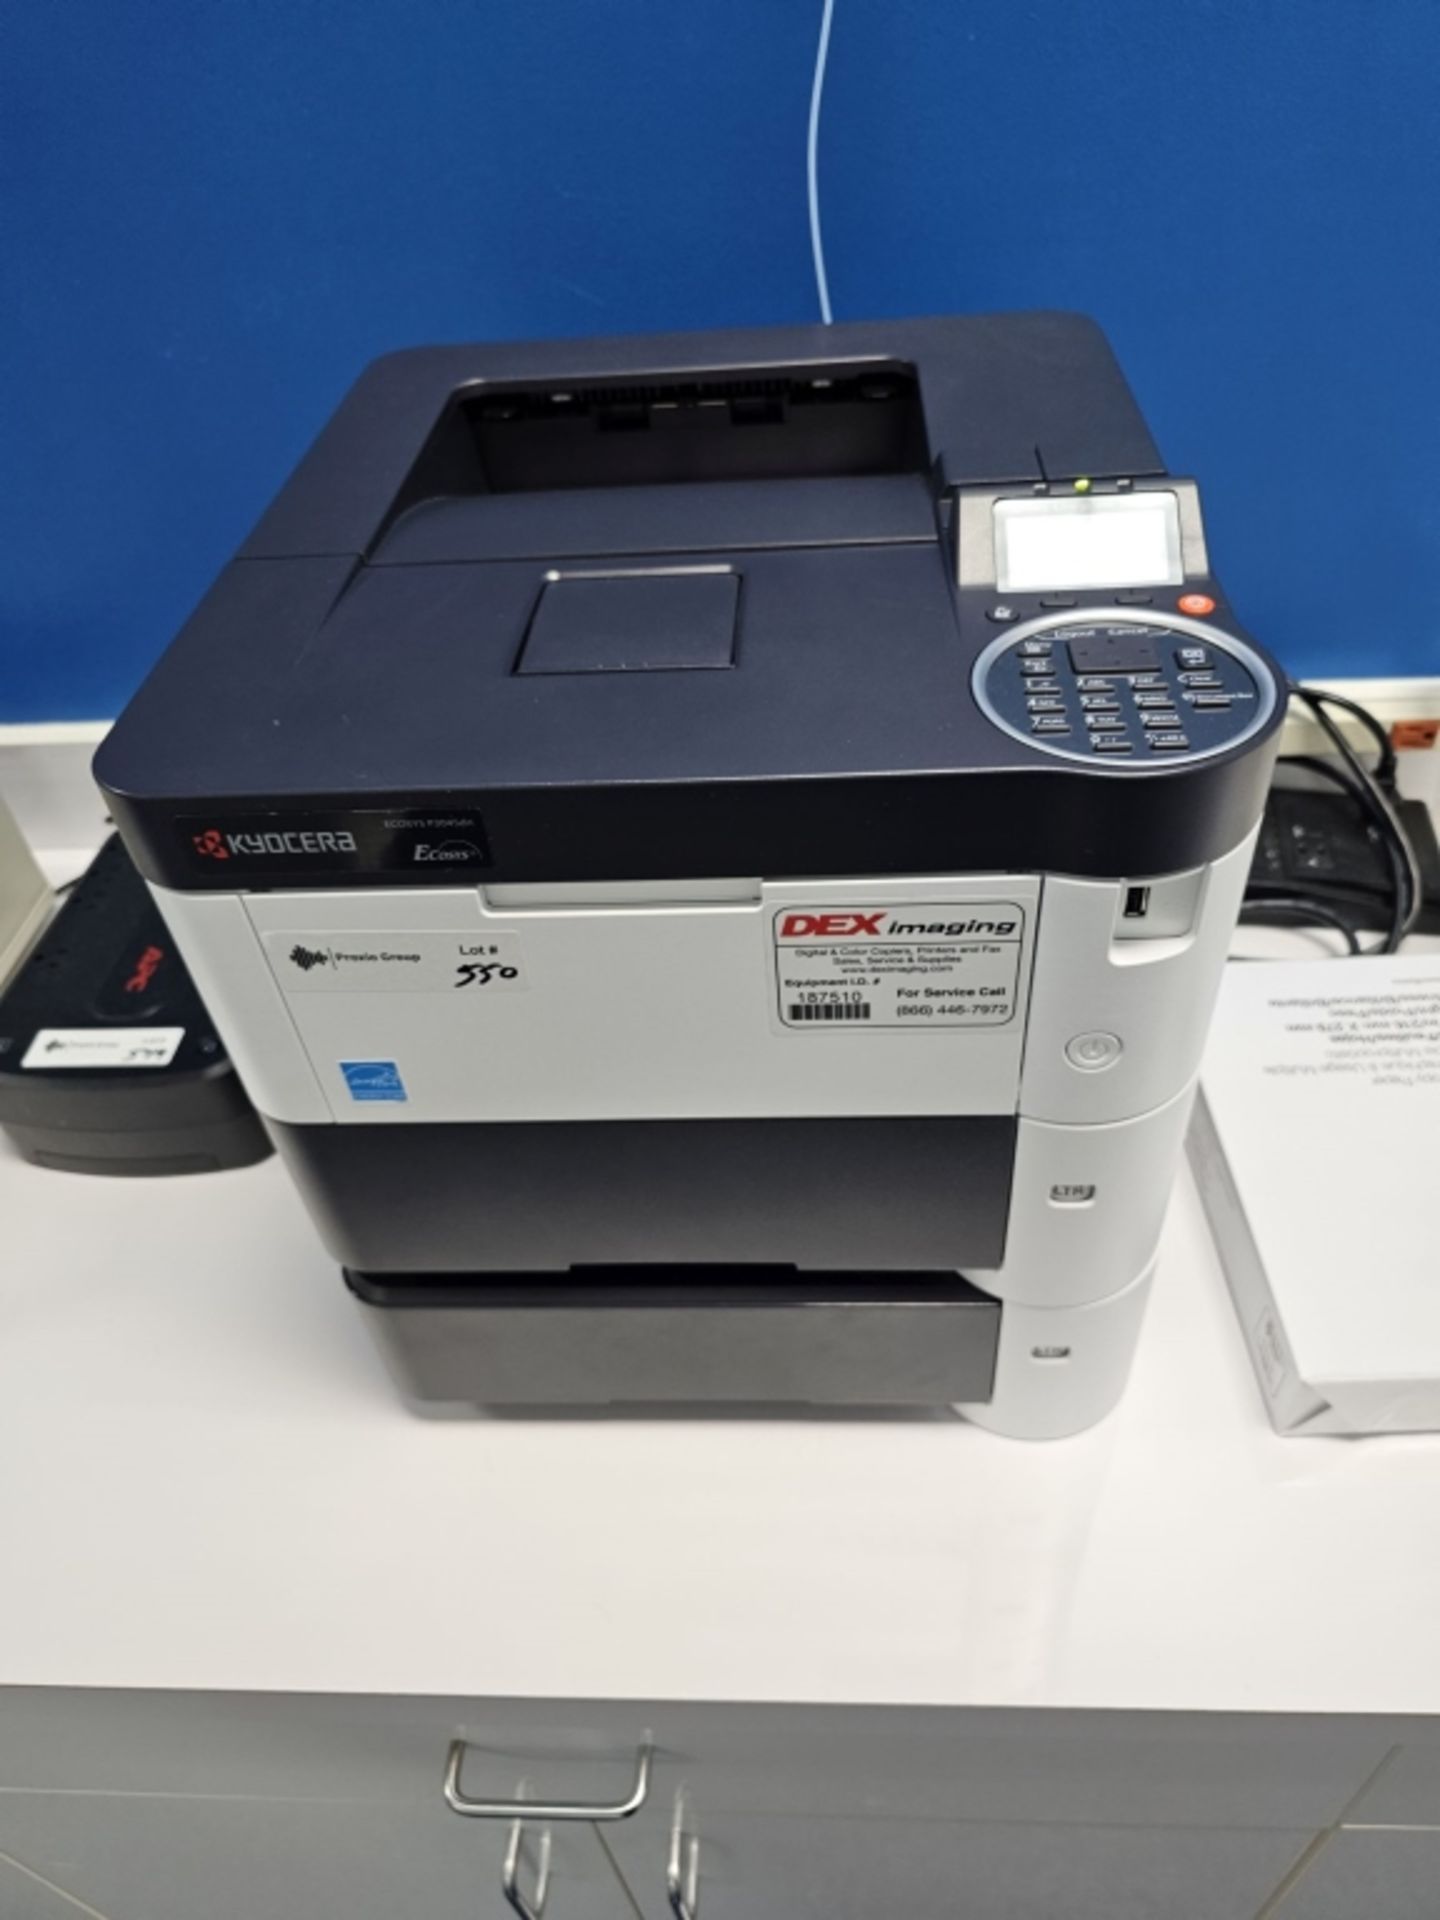 Kyocera Ecosys Series Model P3045dn Duplexing Network Laser Printer - Image 2 of 5